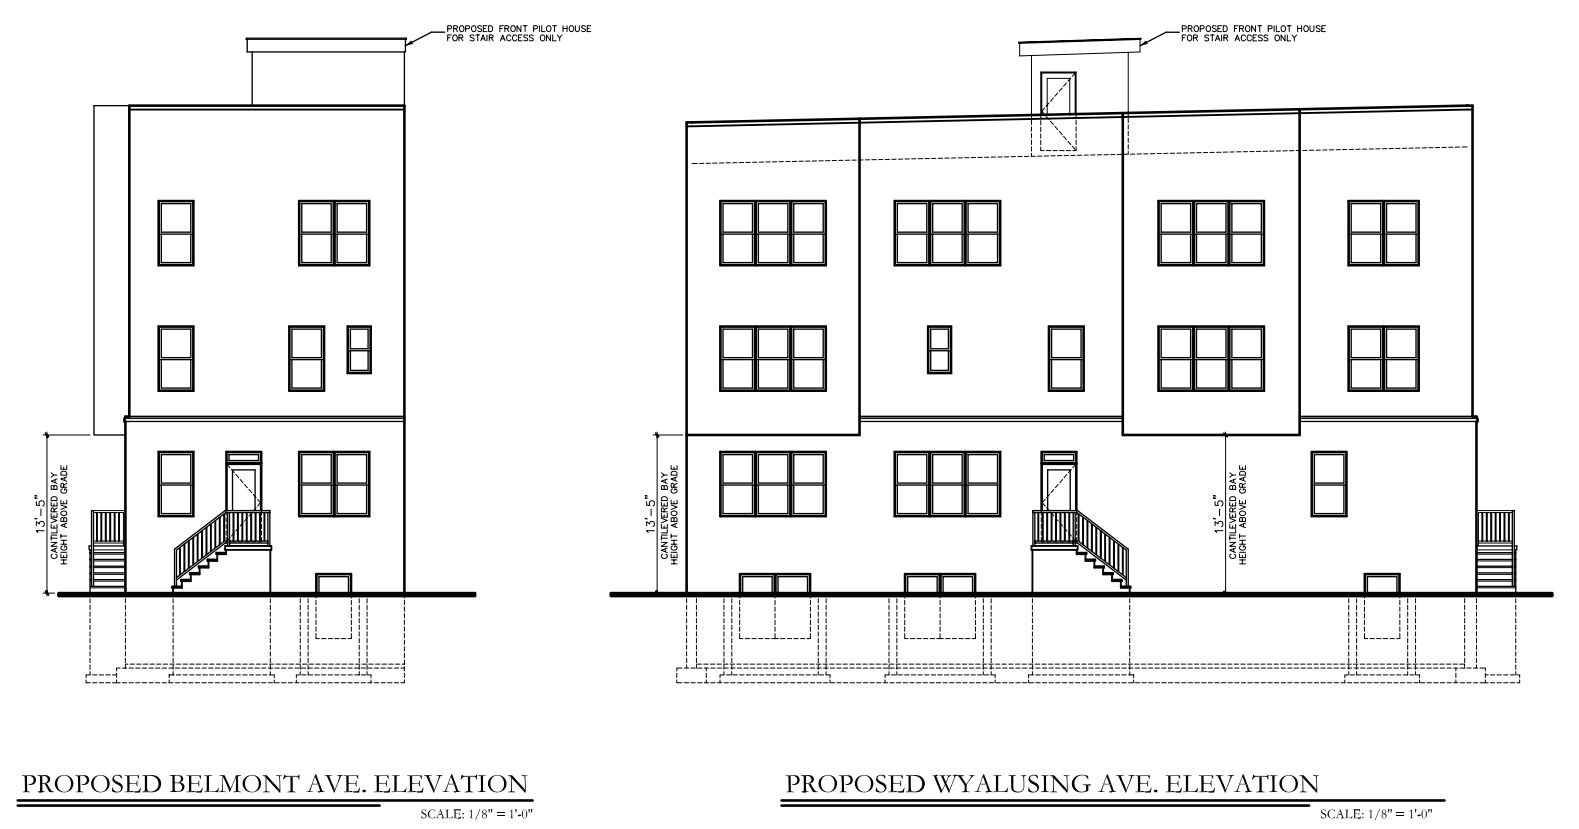 953 Belmont Avenue. Building elevations. Credit: Anthony Maso Architecture & Design via the Department of Planning and Development of the City of Philadelphia